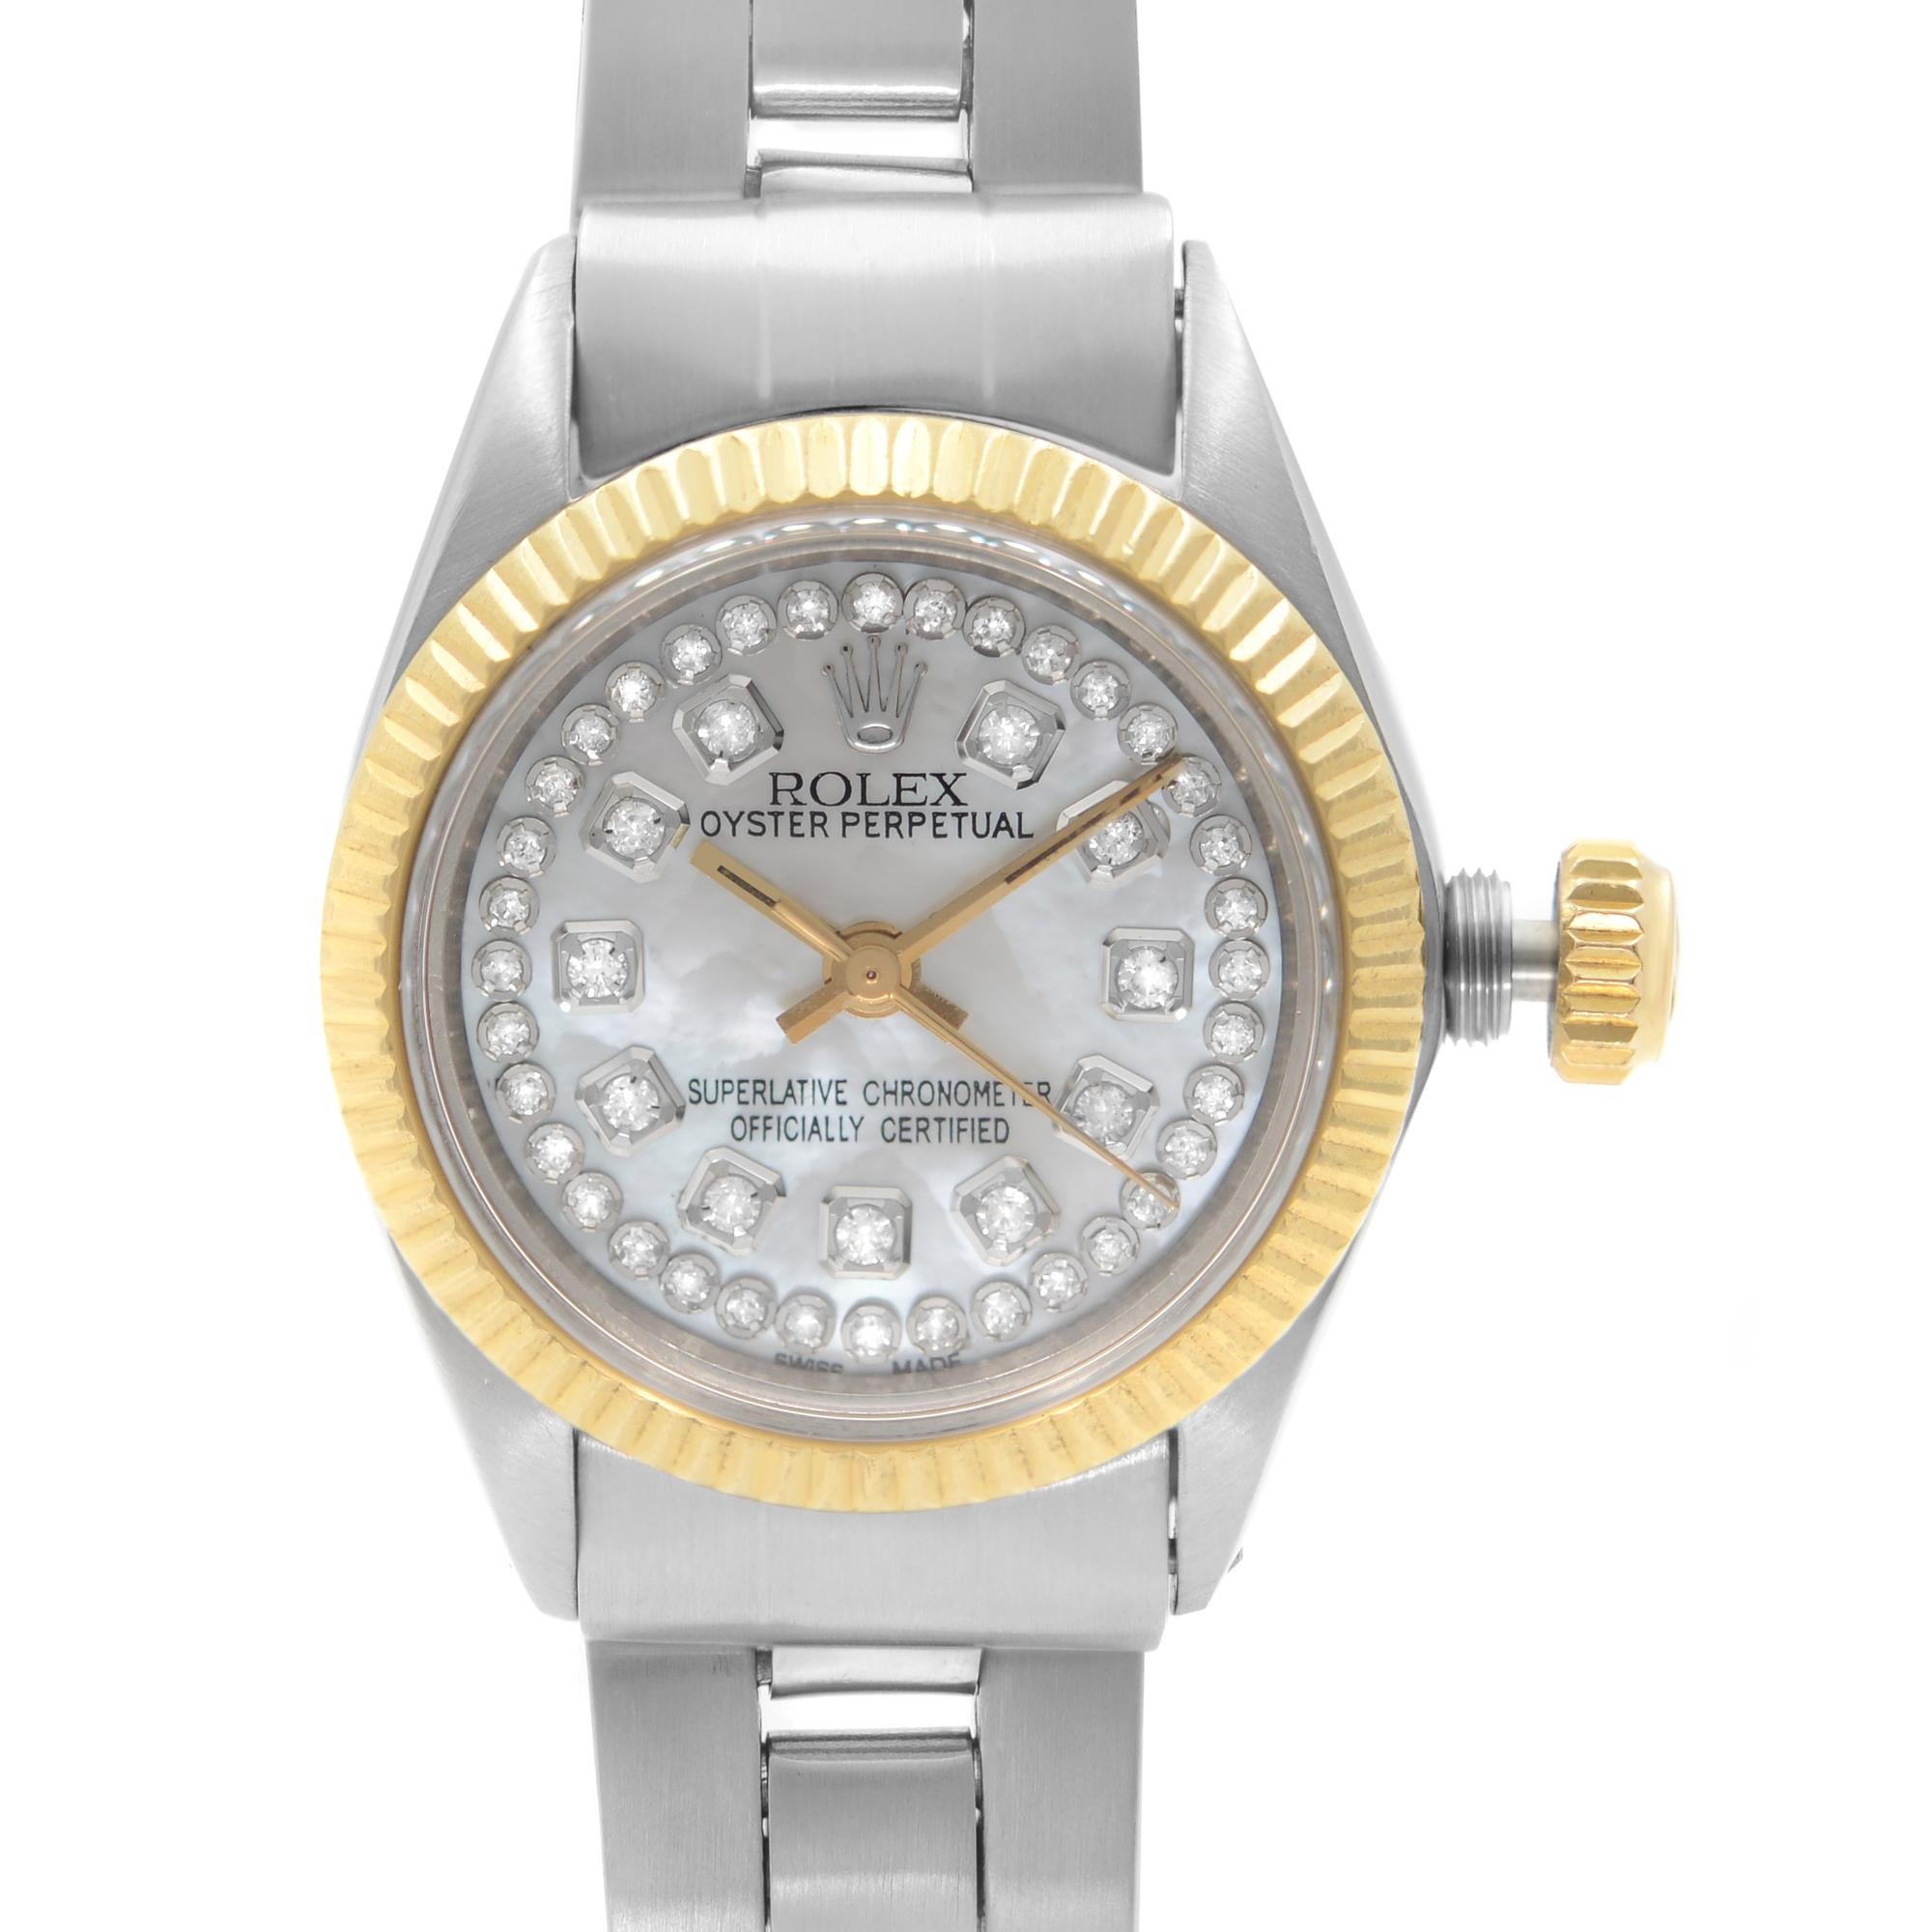 Pre-owned Vintage Rolex Oyster Perpetual Gold Stainless Steel Diamond Mother of Pearl Dial Ladies Watch 6719. It Was Produced in 1973. This Beautiful Timepiece Features: Stainless Steel Case with a Stainless Steel Bracelet, a Fixed Yellow Gold